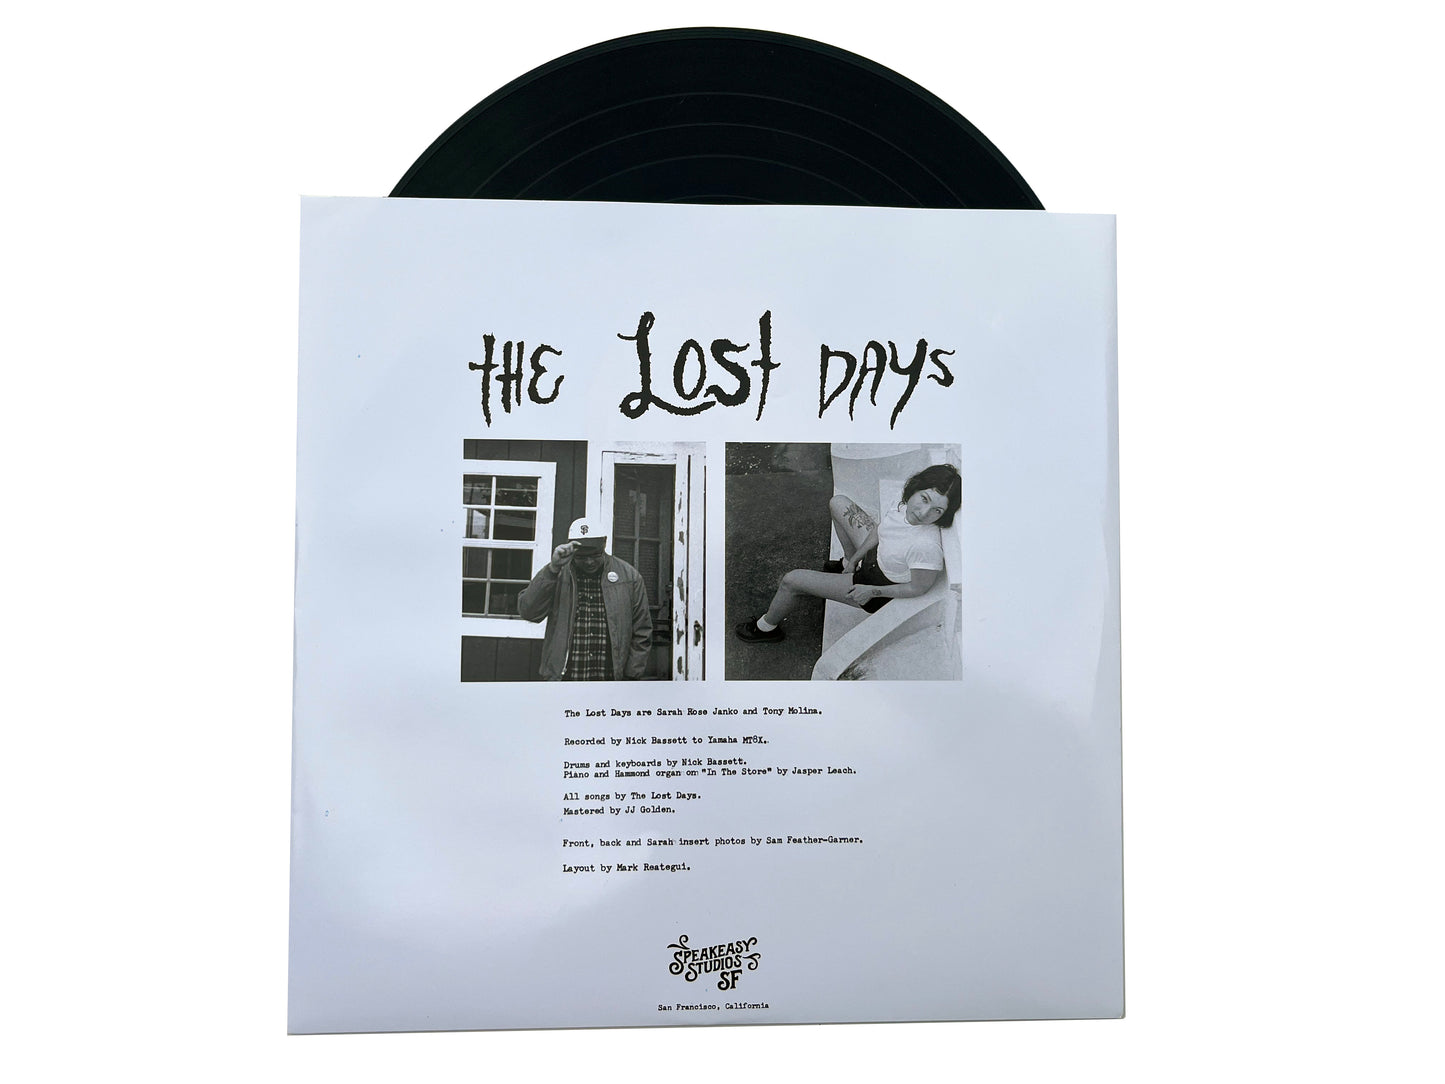 "In The Store" by The Lost Days - Limited Edition Vinyl